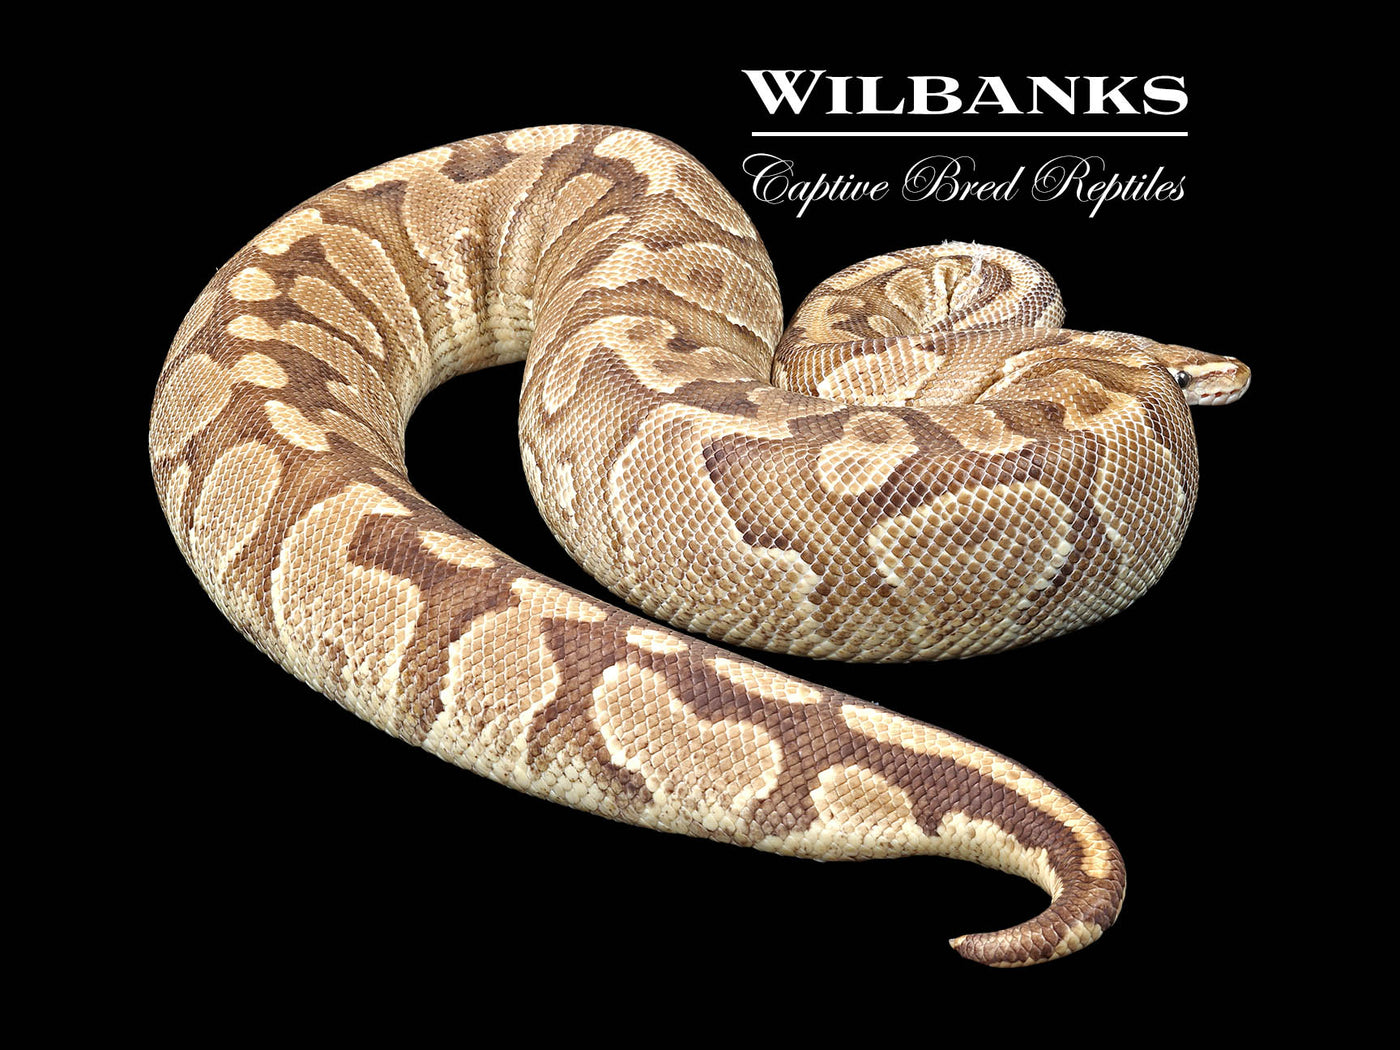 Fire Yellow Belly (Proven Breeder) Ball Python ♀ '16